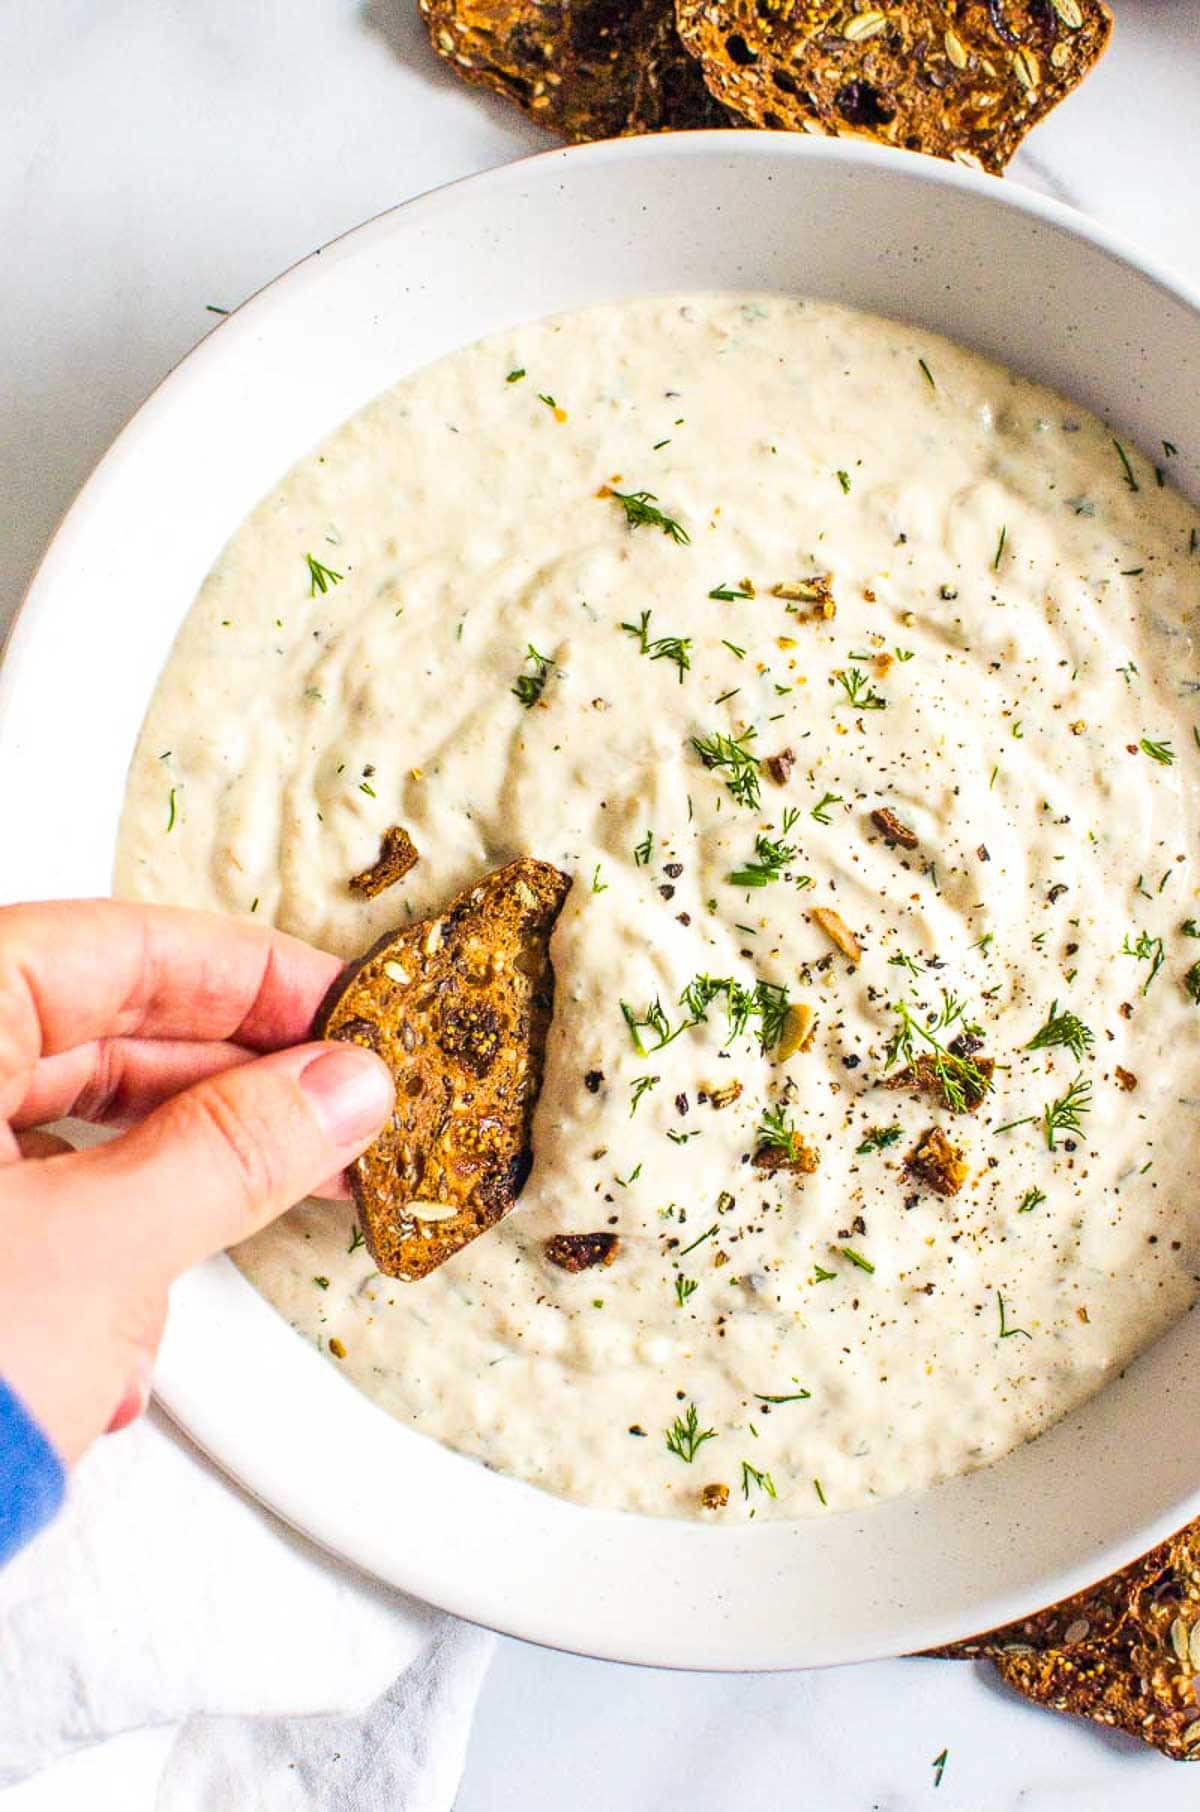 Healthy french onion dip  in a bowl with a cracker being dipped into it.